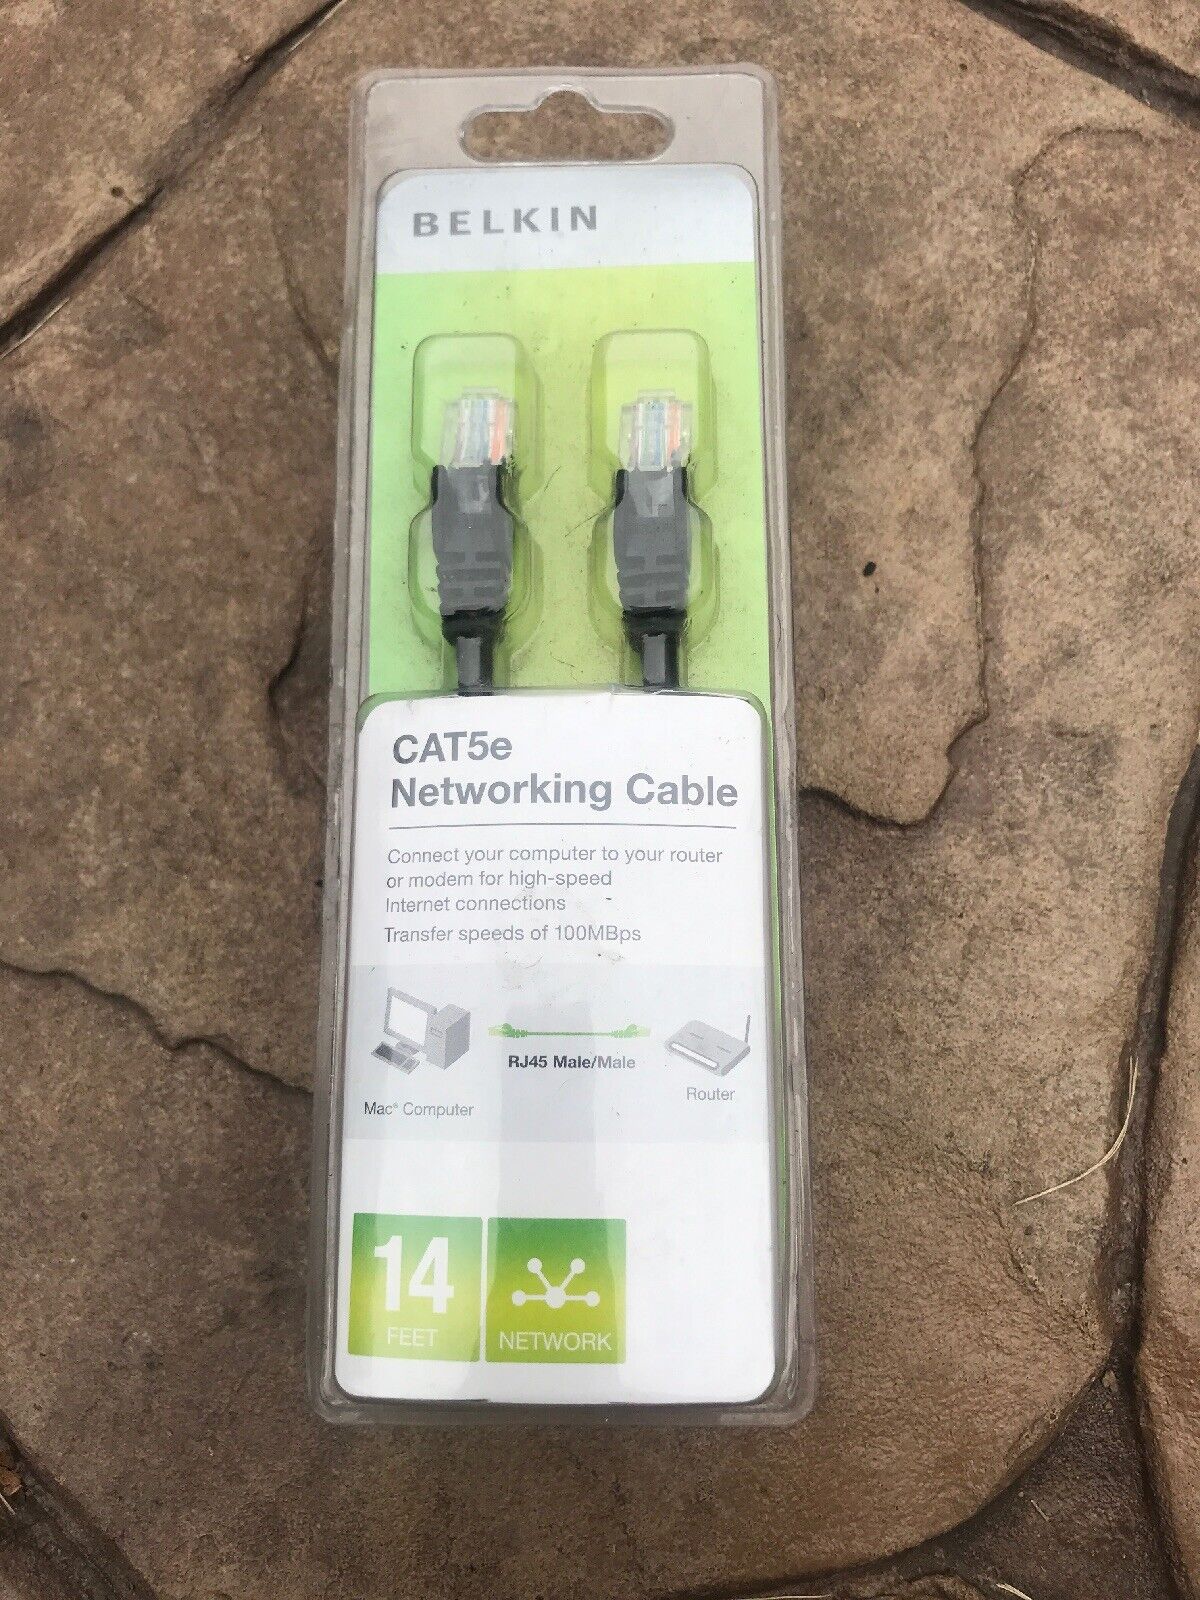 Belkin Cat5e Networking Cable - Cable 14ft Black New